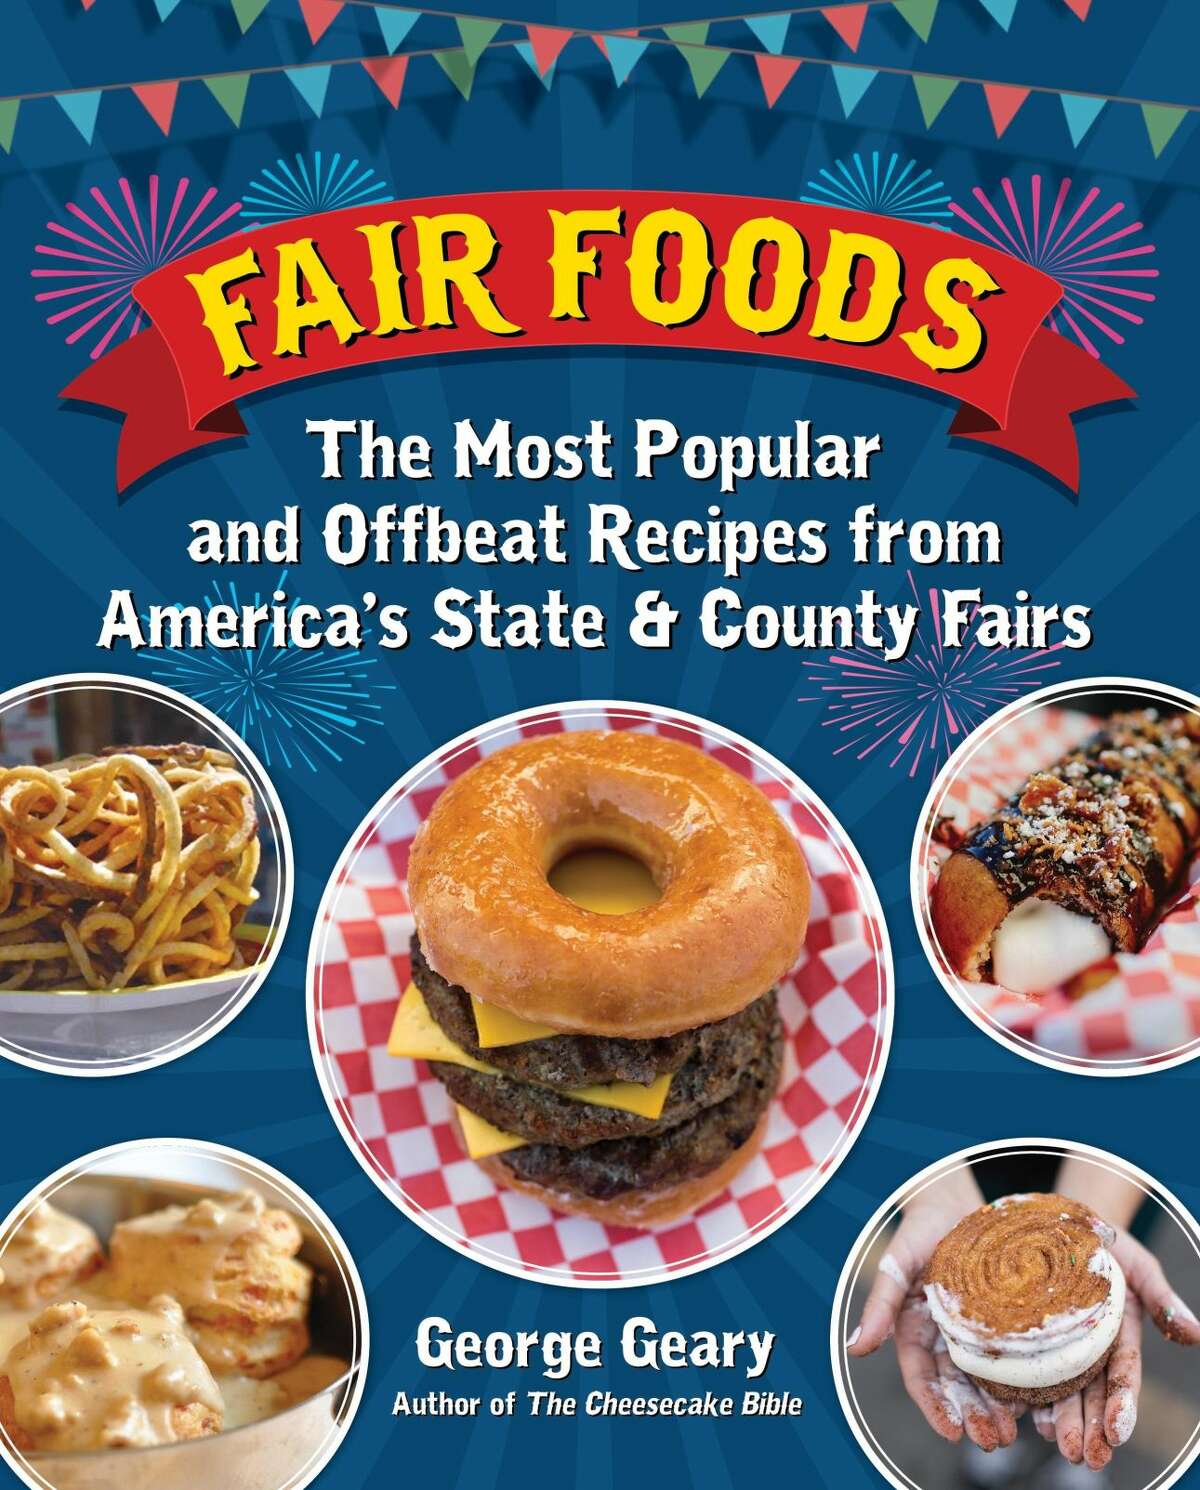 The cover of George Geary's book ?“Fair Foods: The Most Popular and Offbeat Recipes from America?’s State & County Fairs?” (2017, Santa Monica Press)